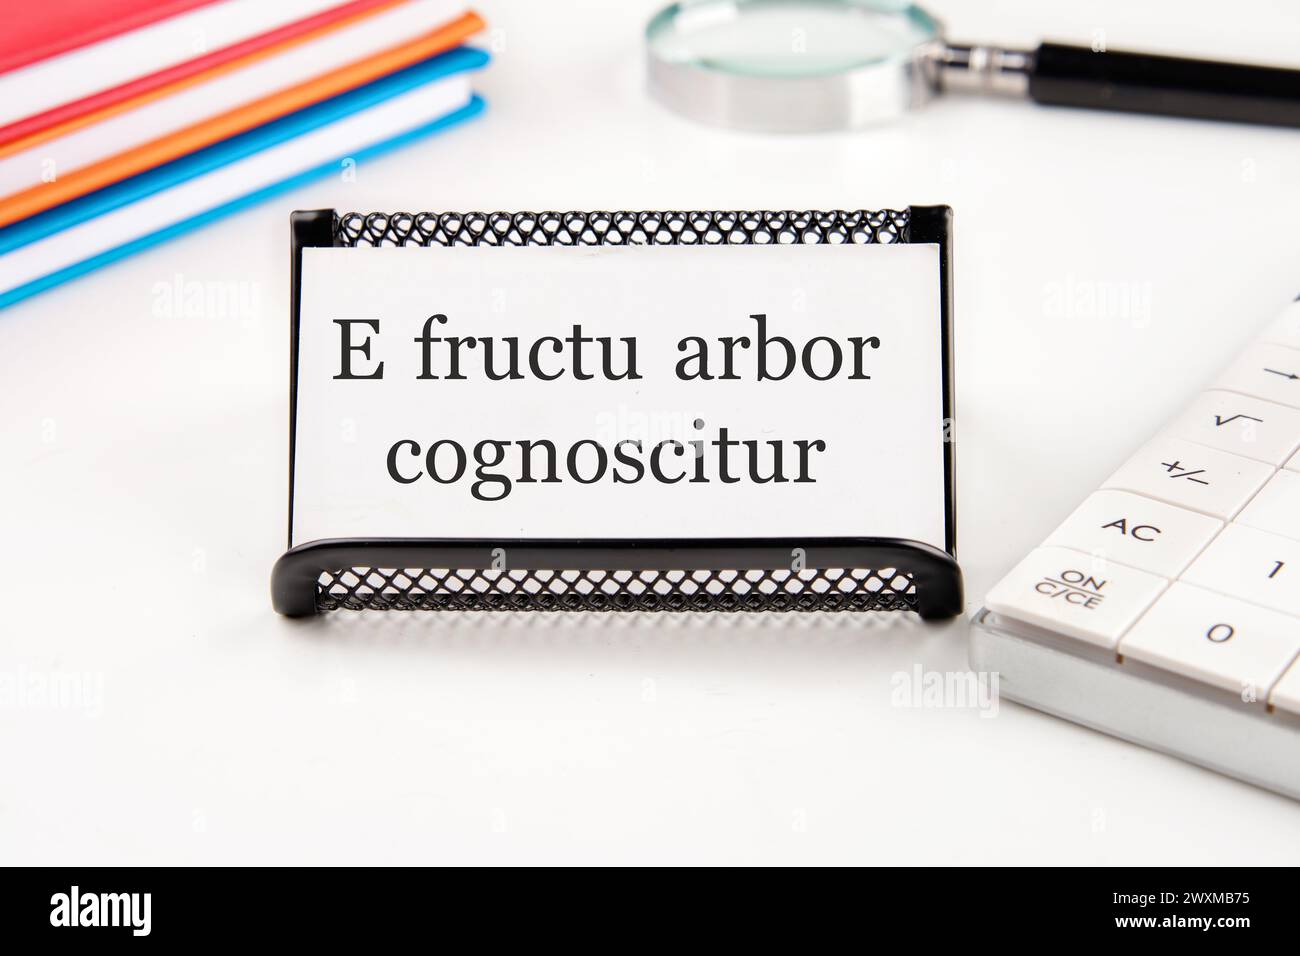 E fructu arbor cognoscitur the phrase in Latin translates as the Tree is known by its fruits on a white business card on a table with office supplies Stock Photo